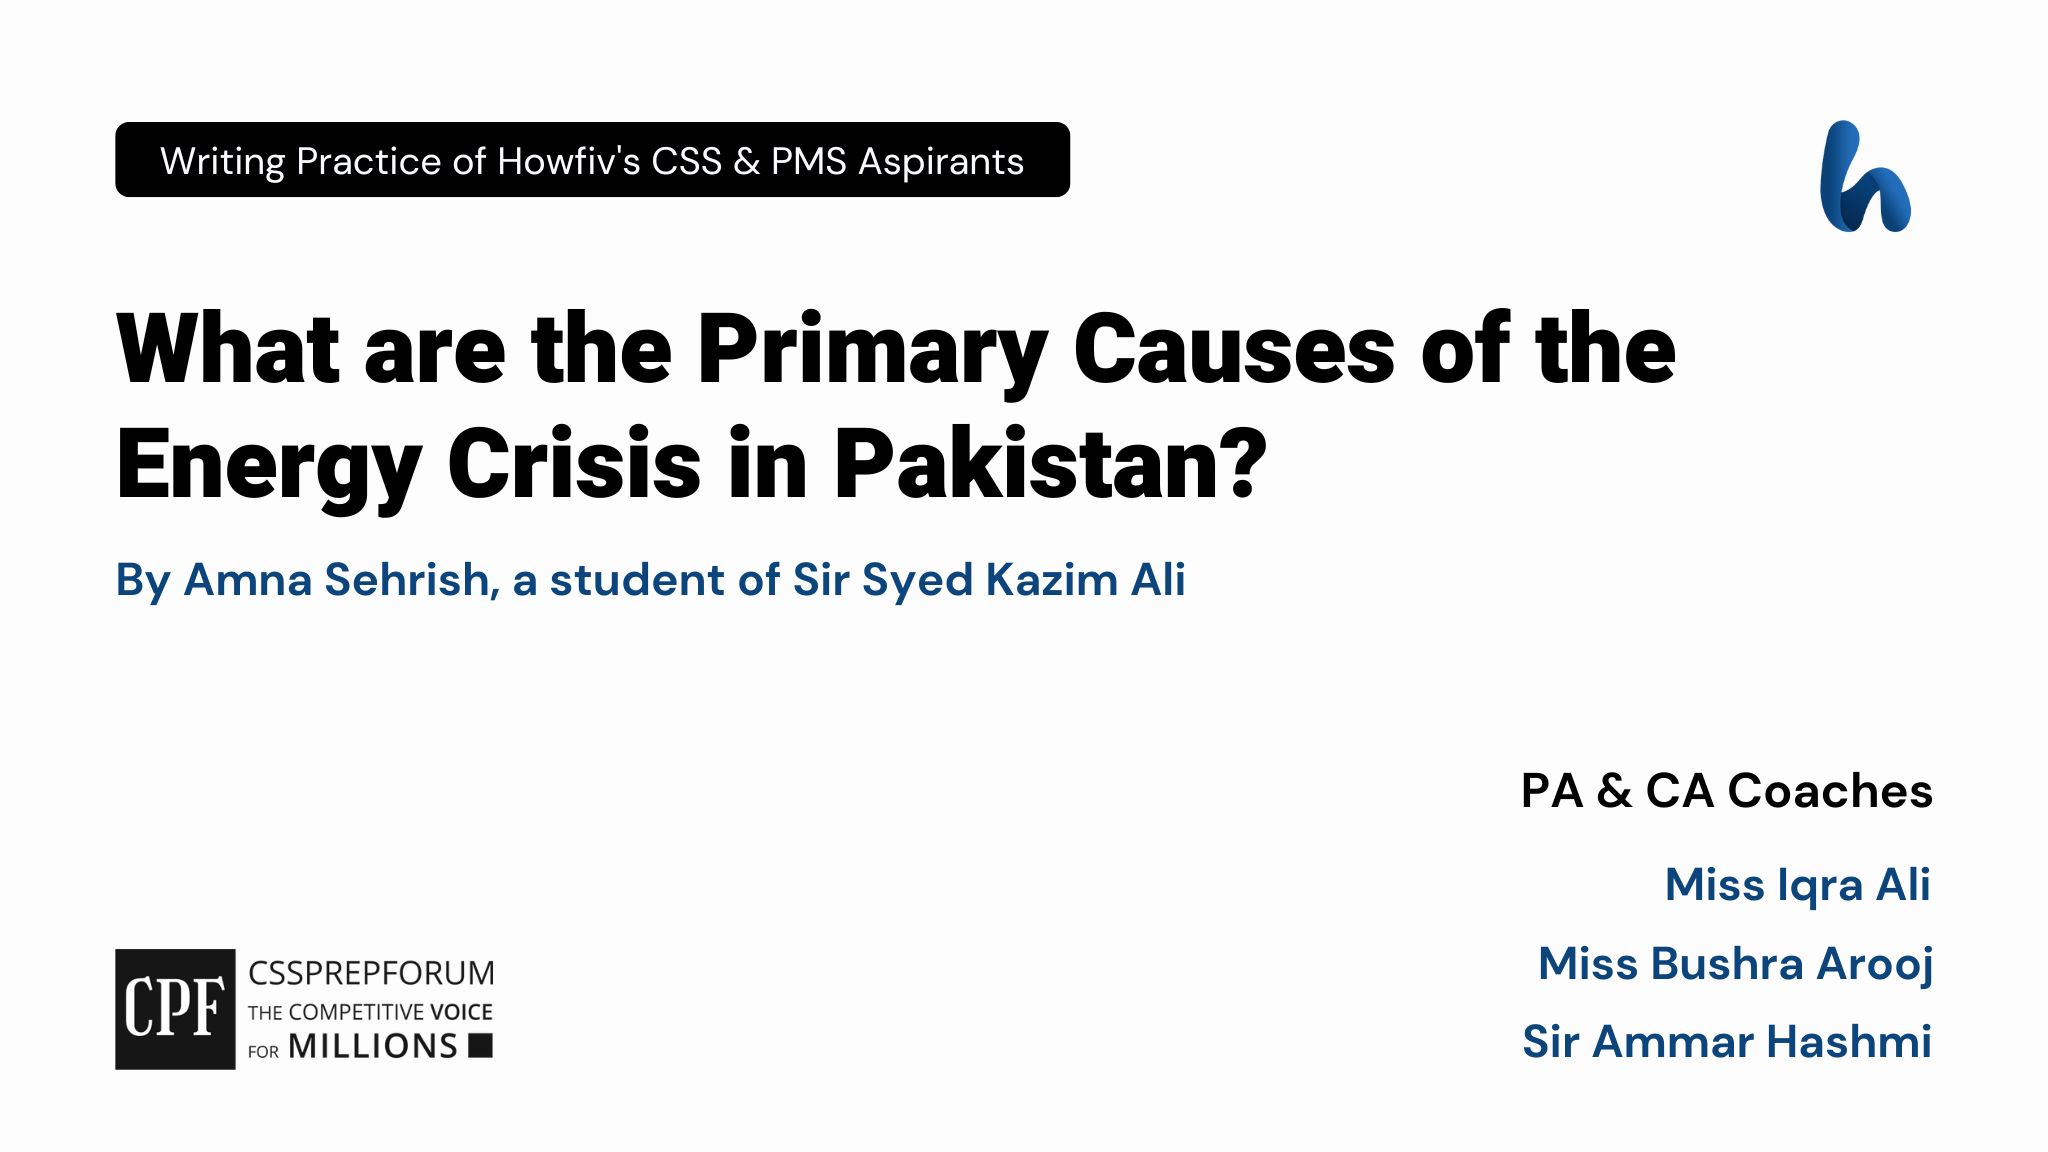 CSS Current Affairs article | Primary Causes of the Energy Crisis in Pakistan | is written by Amna Sehrish under the Supervision of Sir Ammar Hashmi...